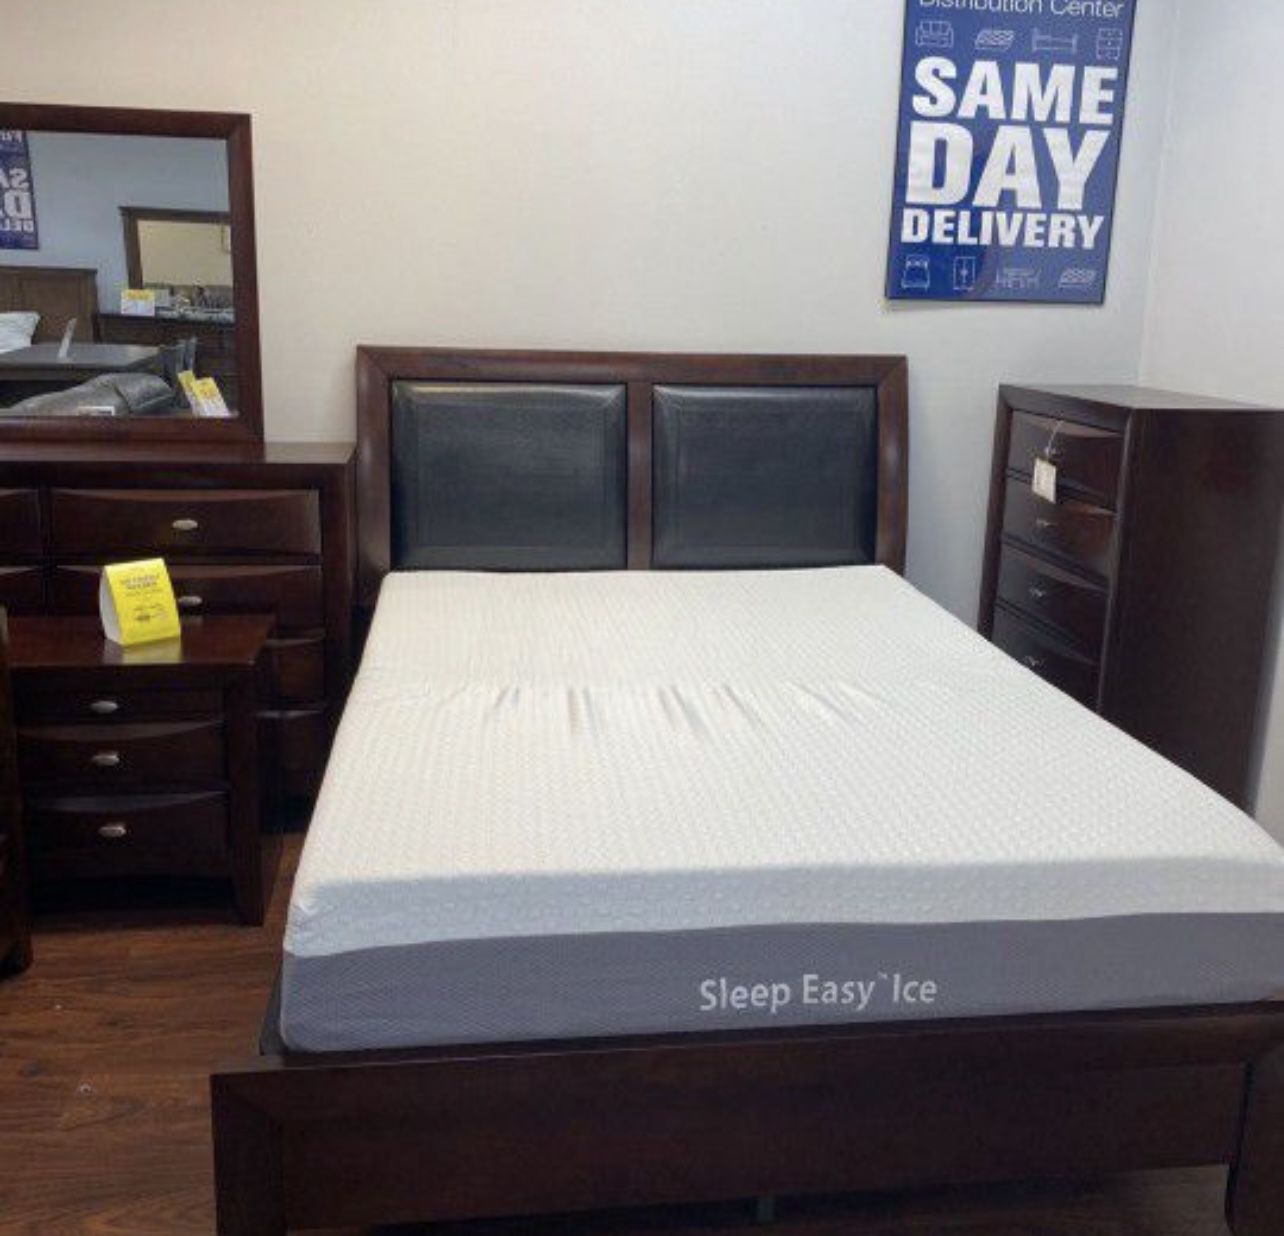 Limited Time Sale With $ 1 GYS King Bed